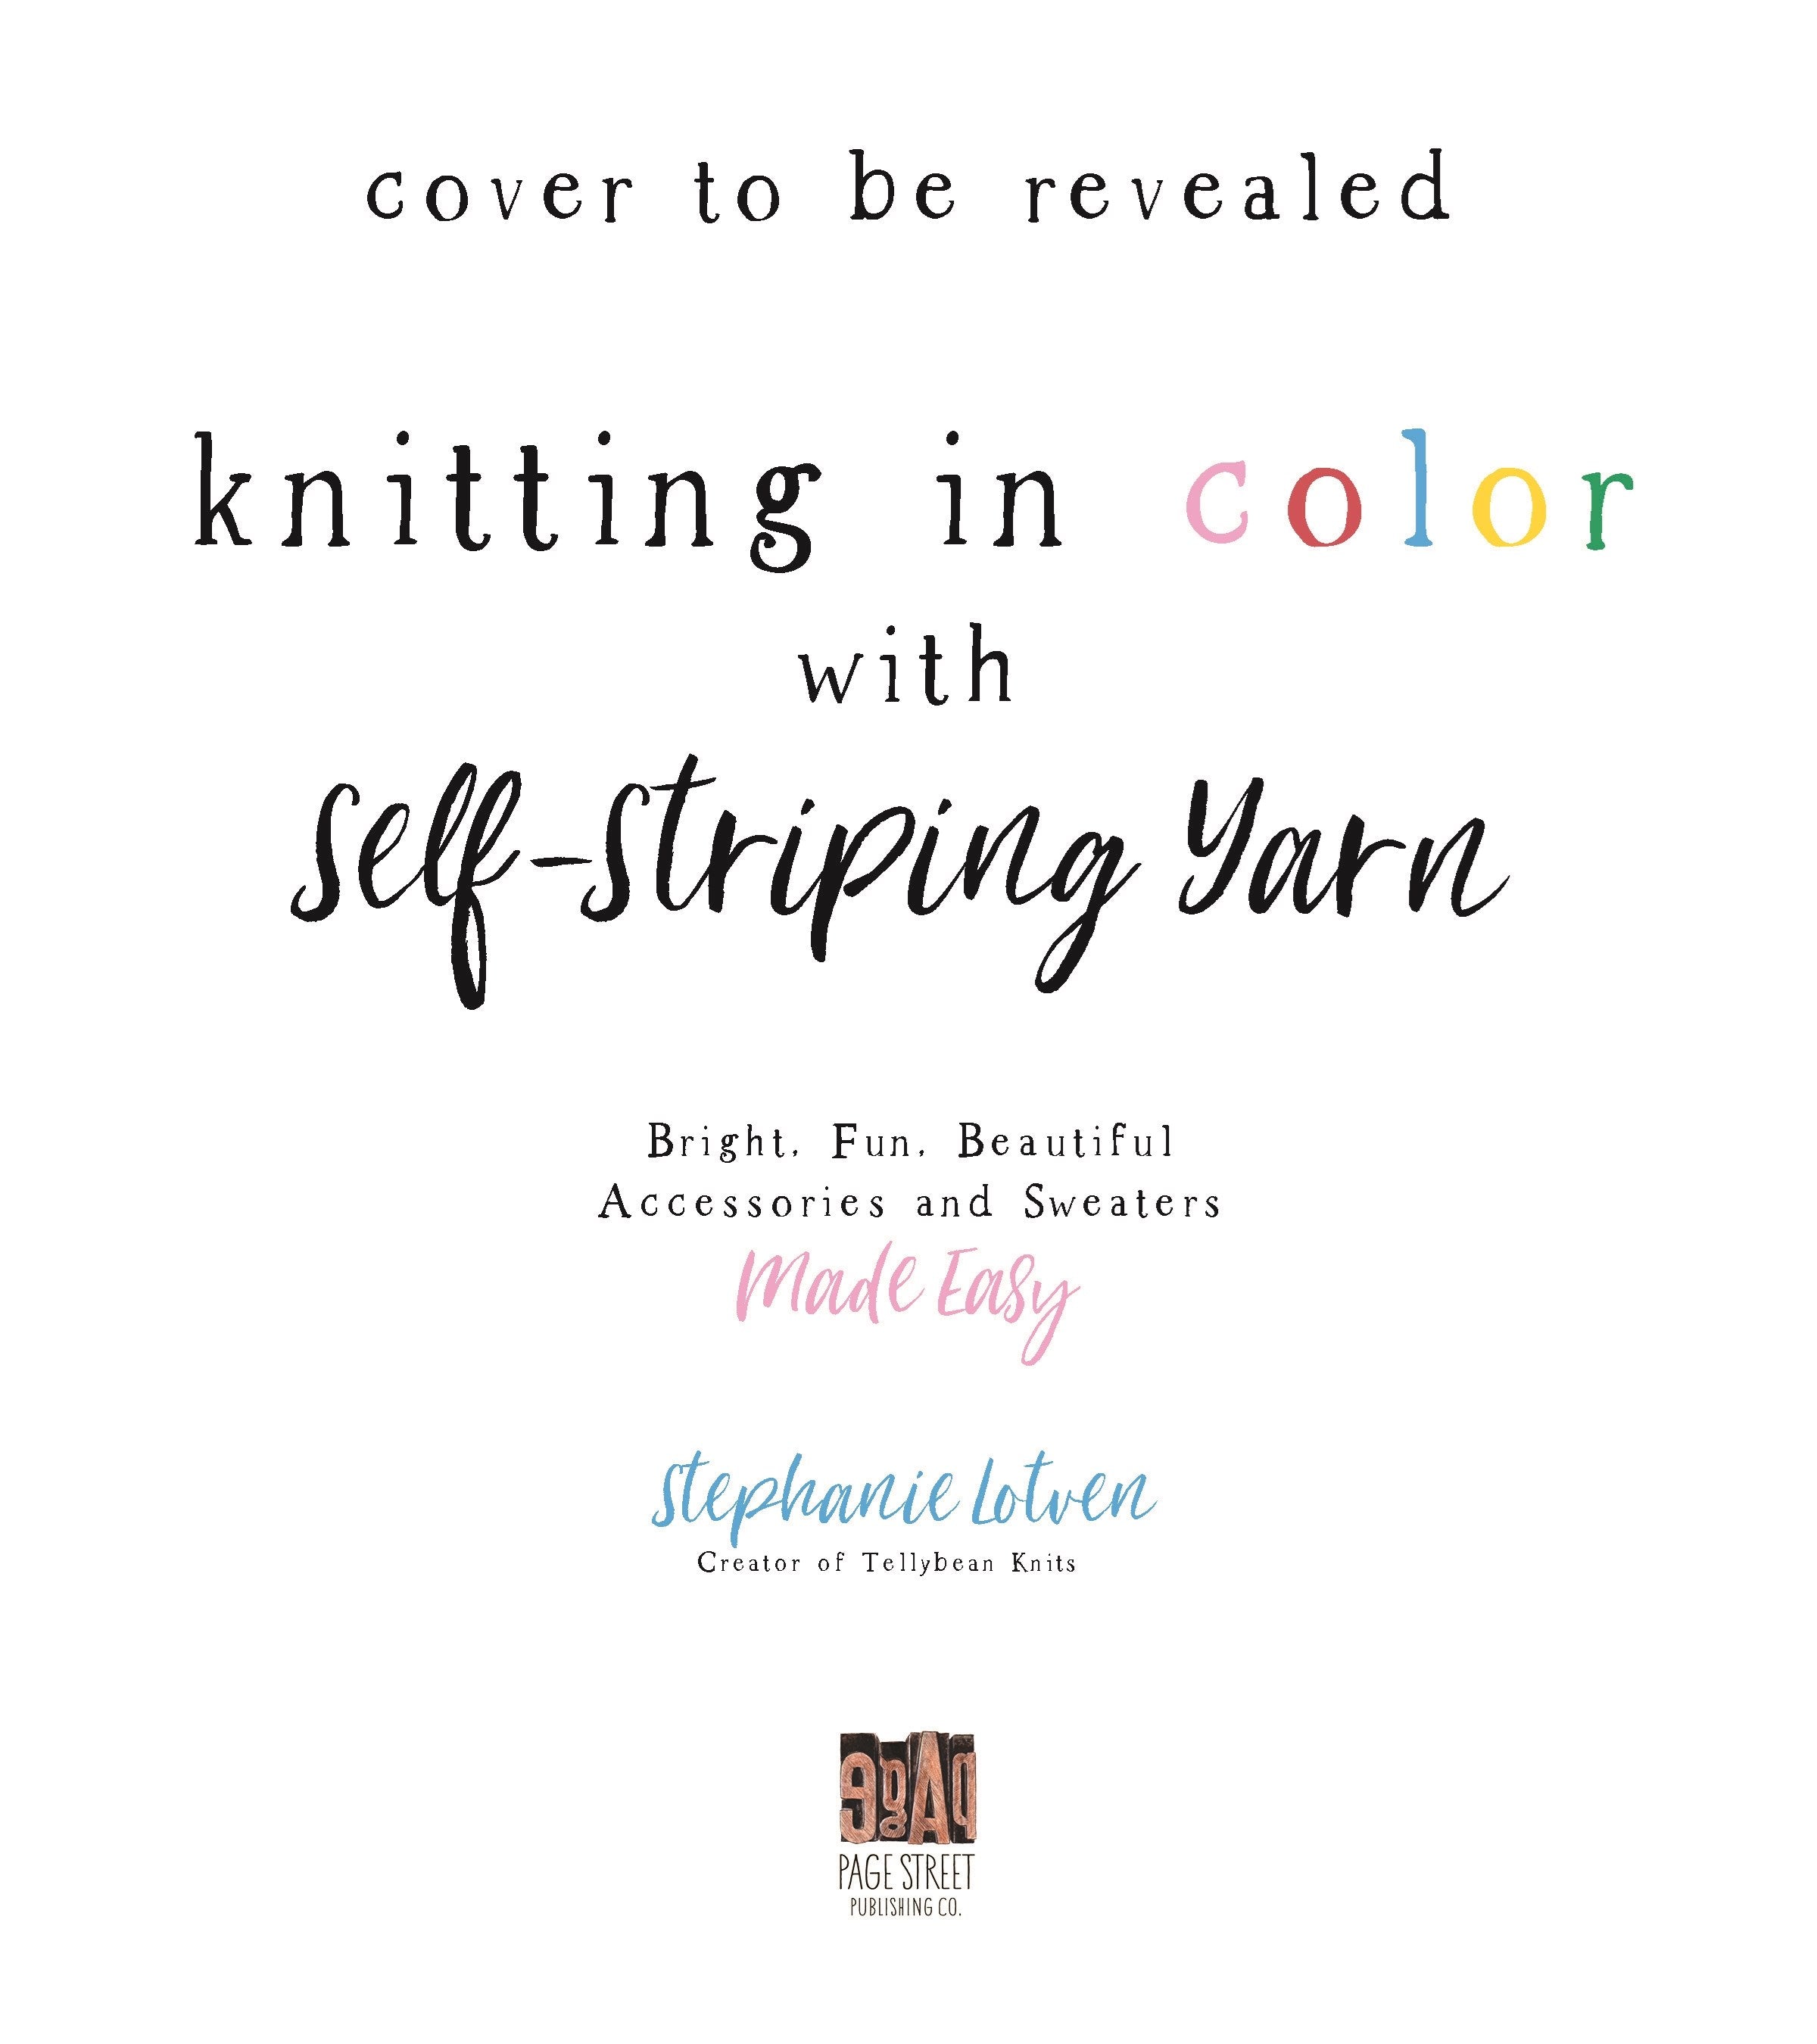 Knit Happy with Self-Striping Yarn: Bright, Fun and Colorful Sweaters and Accessories Made Easy